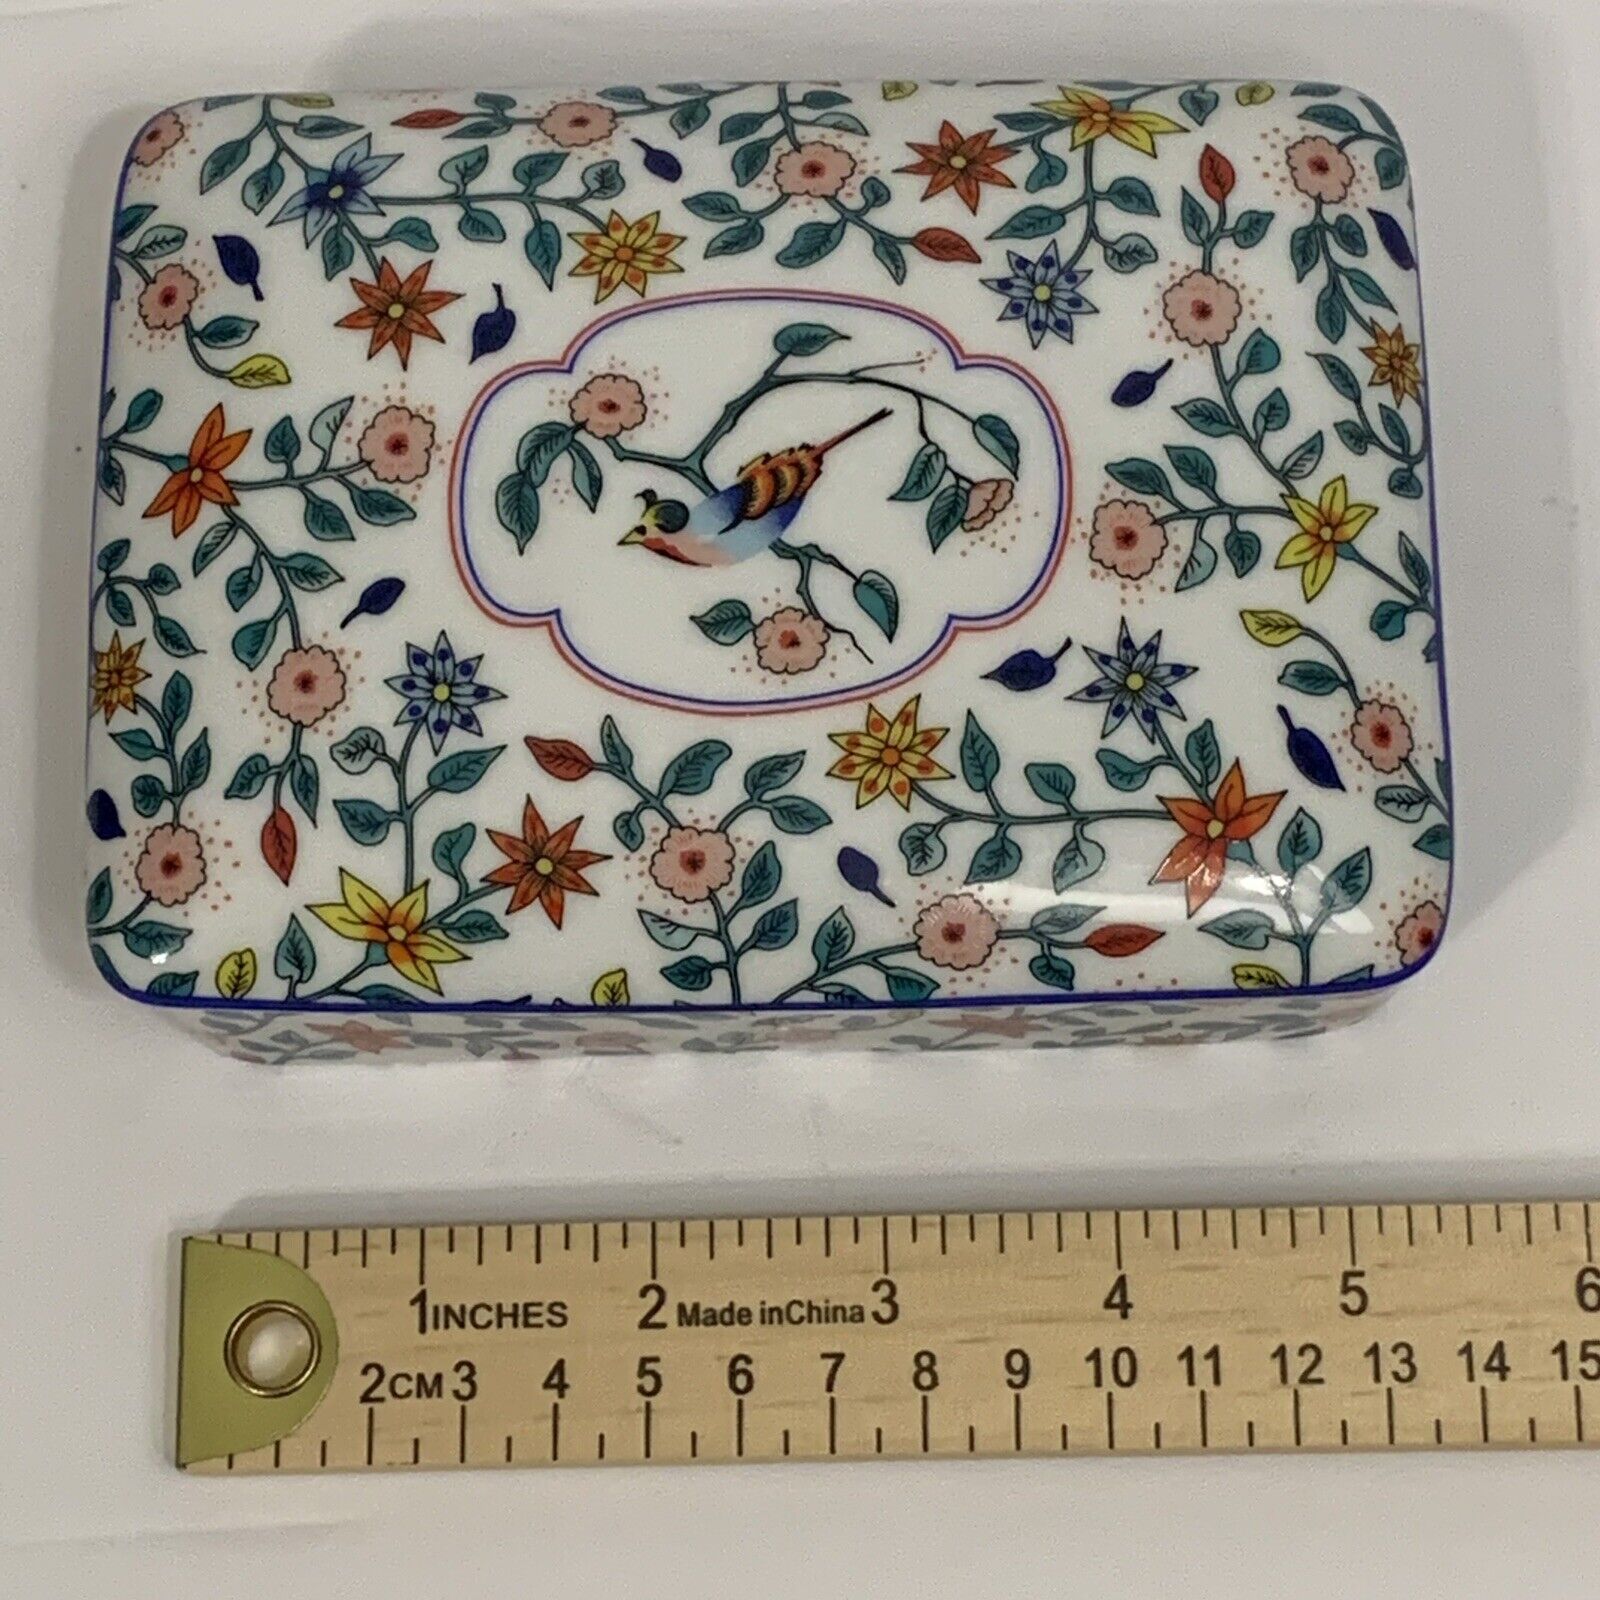 Vintage Hand Painted Neiman Marcus Porcelain Divided Card Box